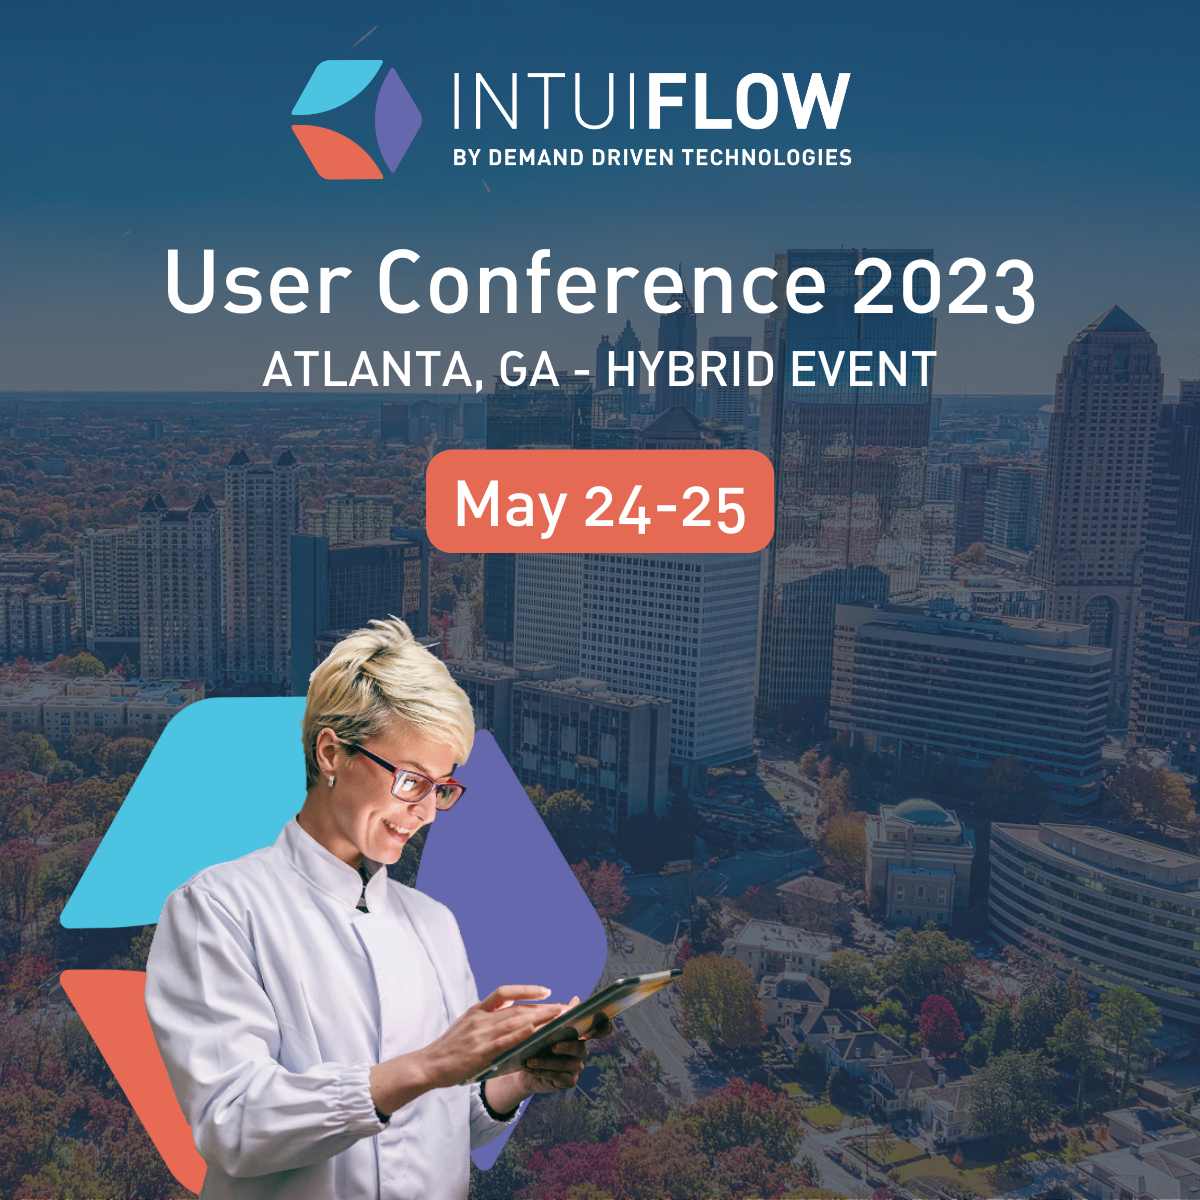 Intuiflow User Conference 2023